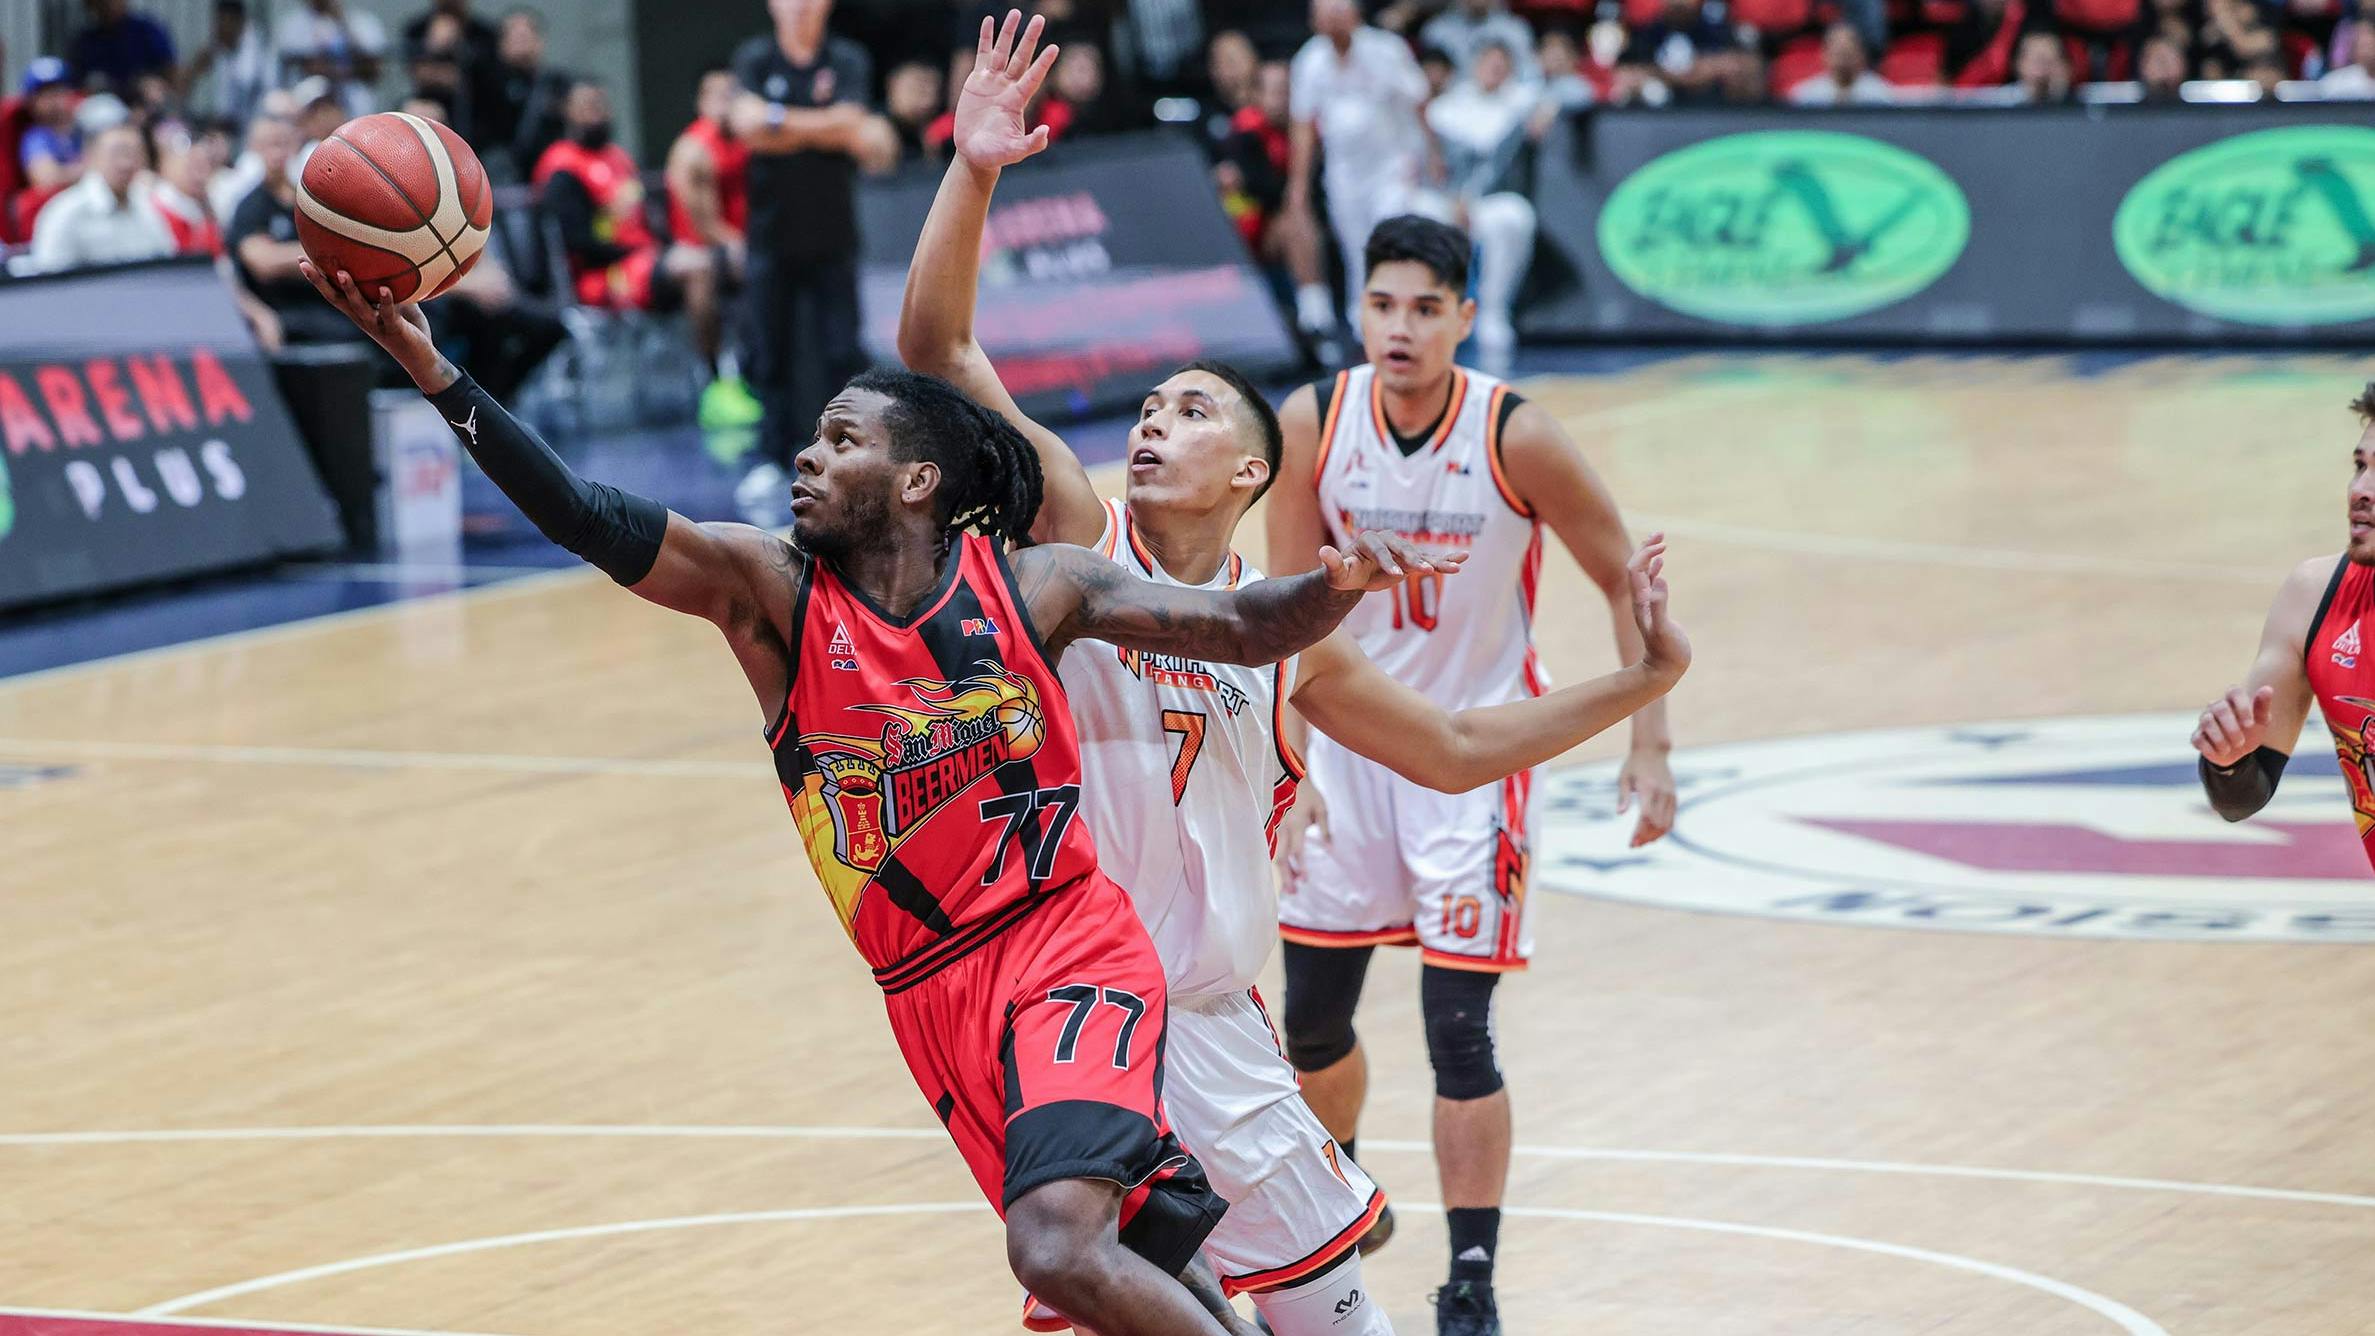 PBA: San Miguel overwhelms NorthPort, continues dominance at 7-0